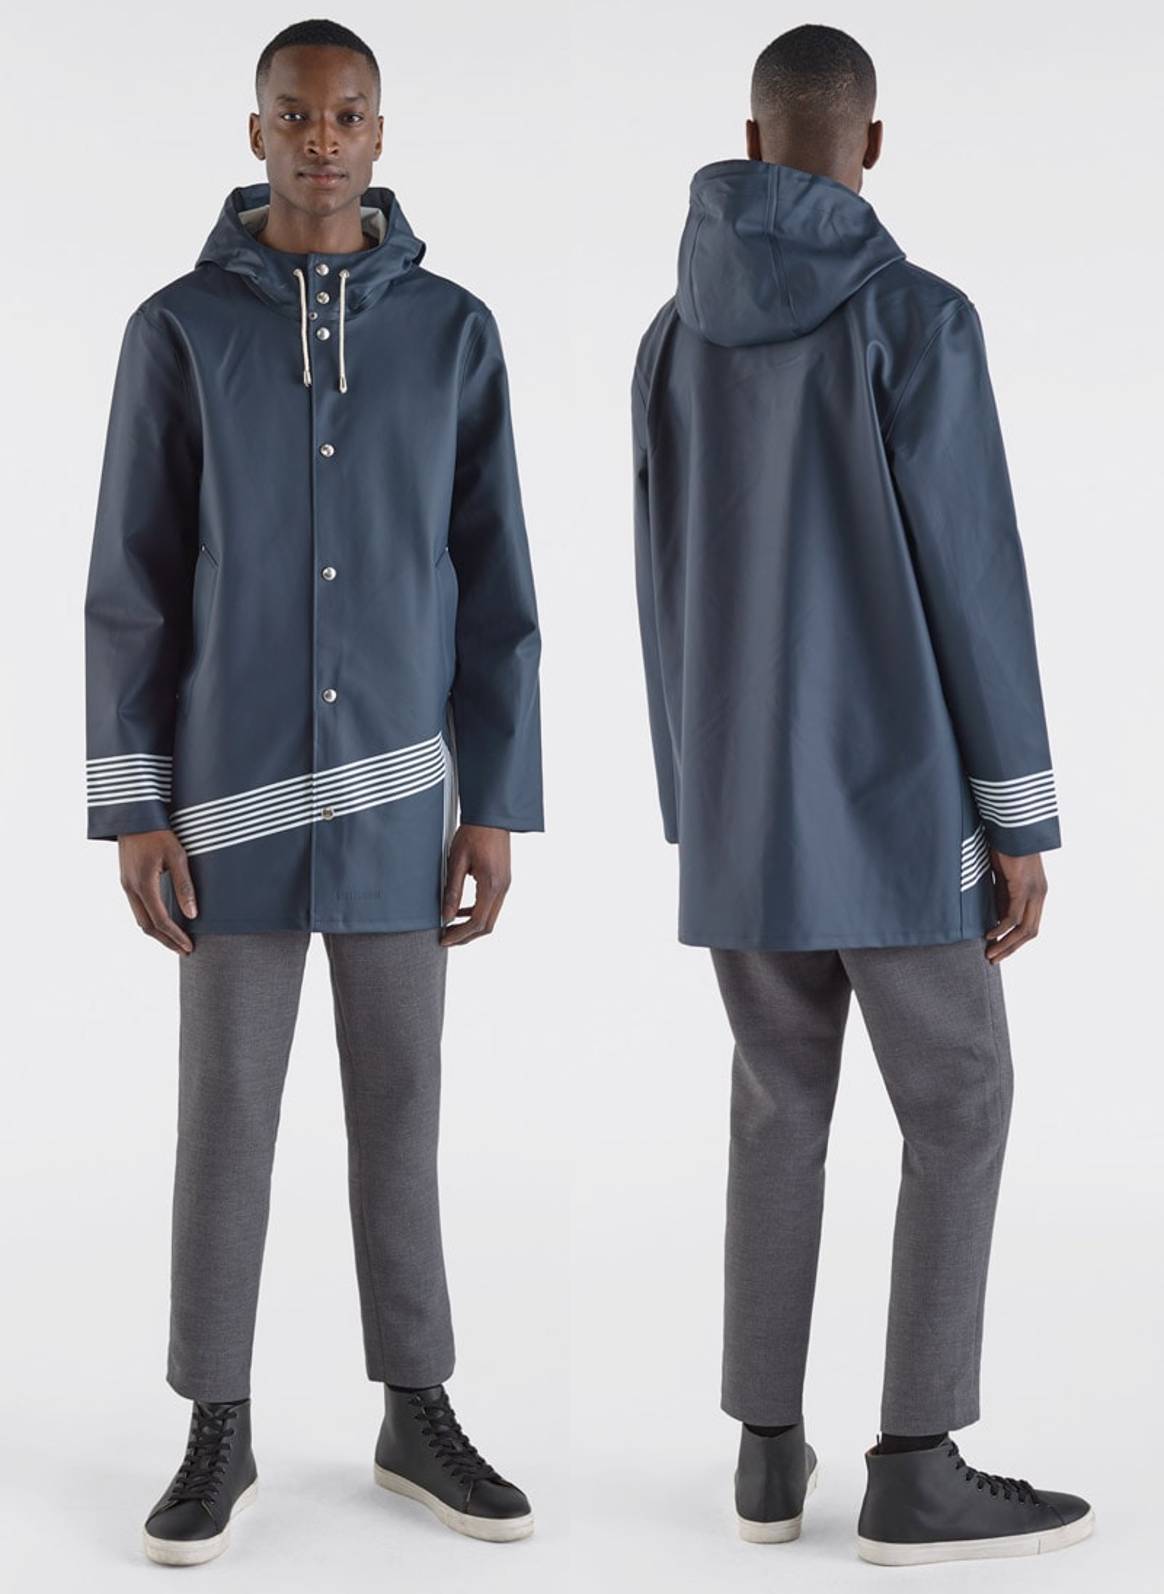 In Pictures: Stutterheim x Band of Outsiders